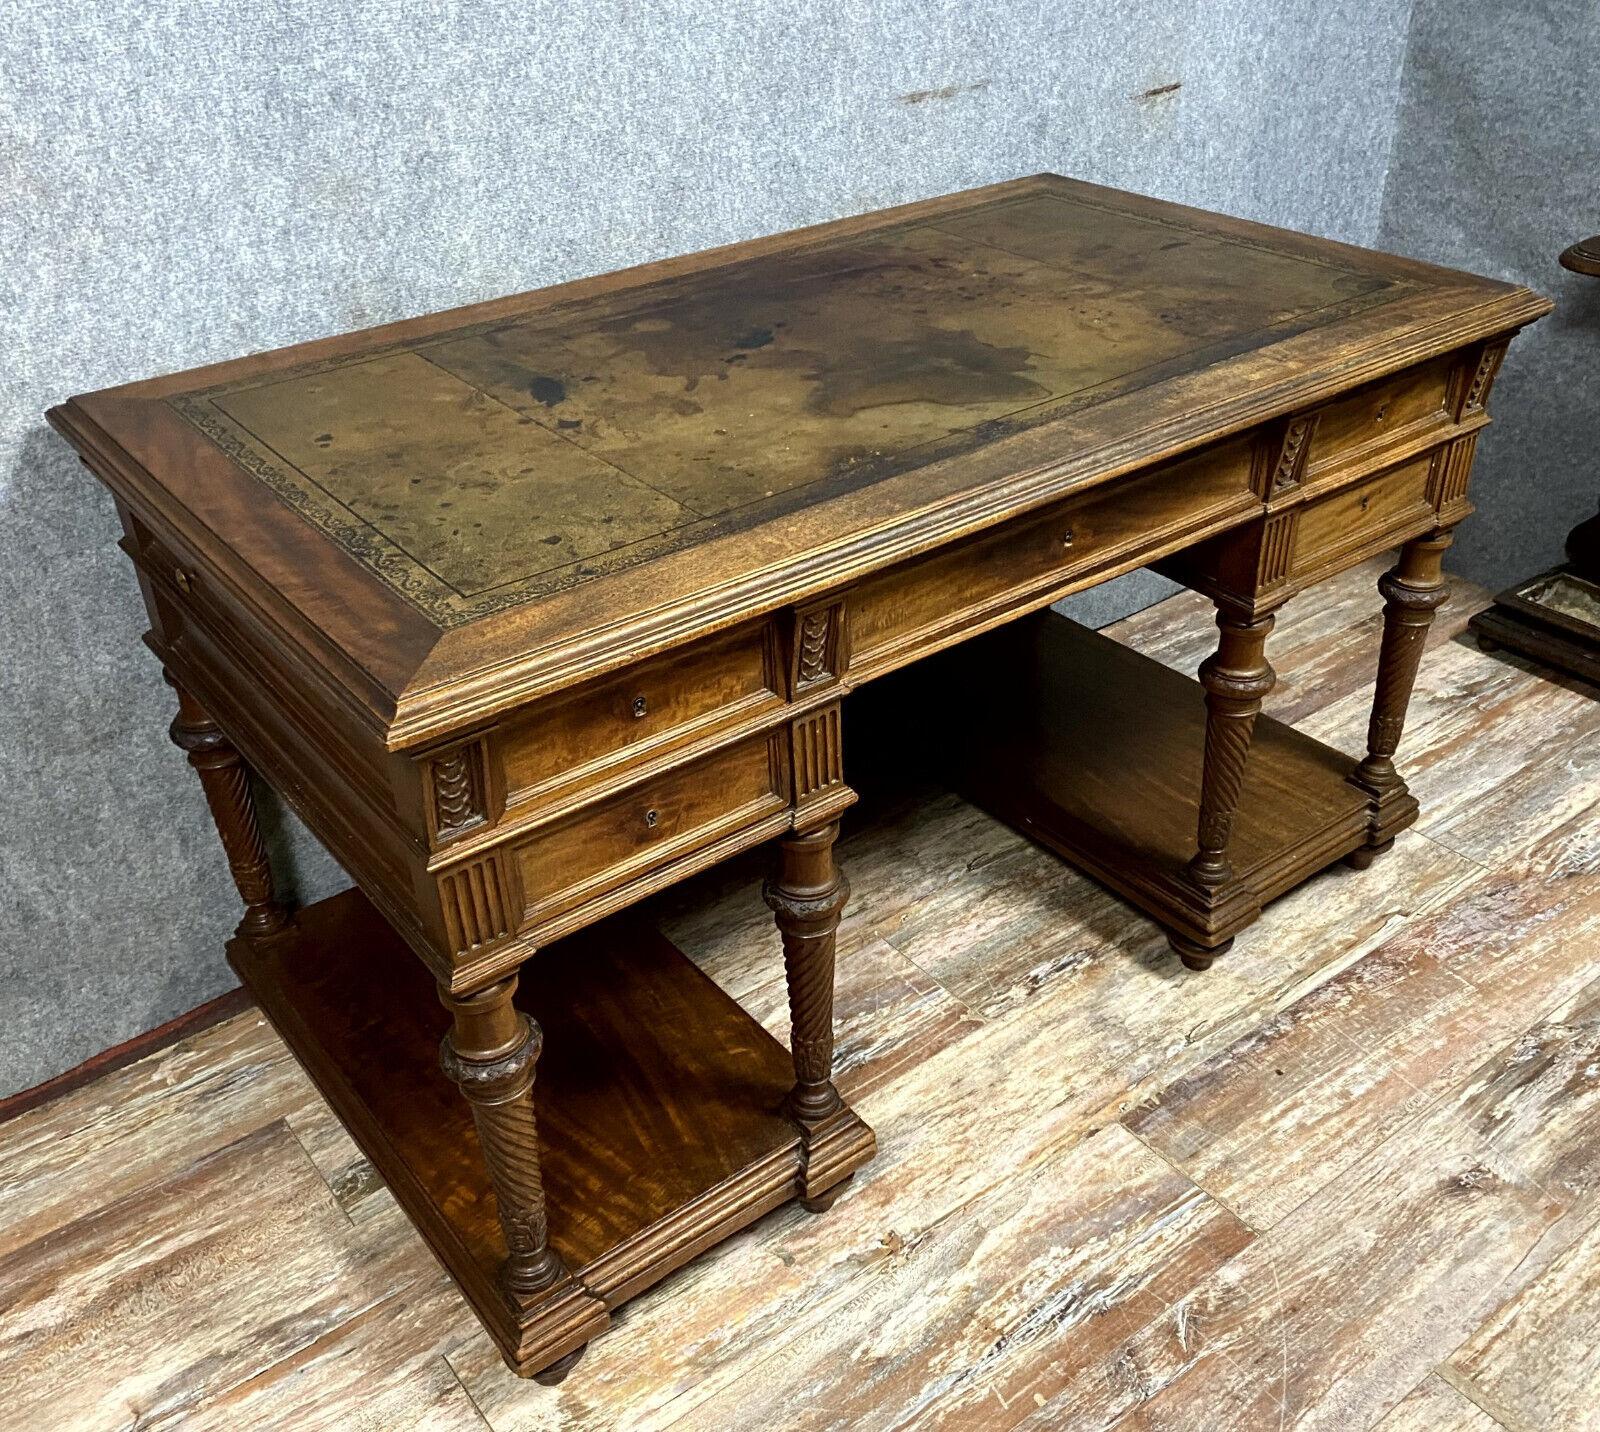 Add a touch of timeless elegance to your study or office with this exquisite Mazarin style center desk from the 19th century. Crafted from rich walnut wood, this desk features a classic design and functional details that make it both a practical